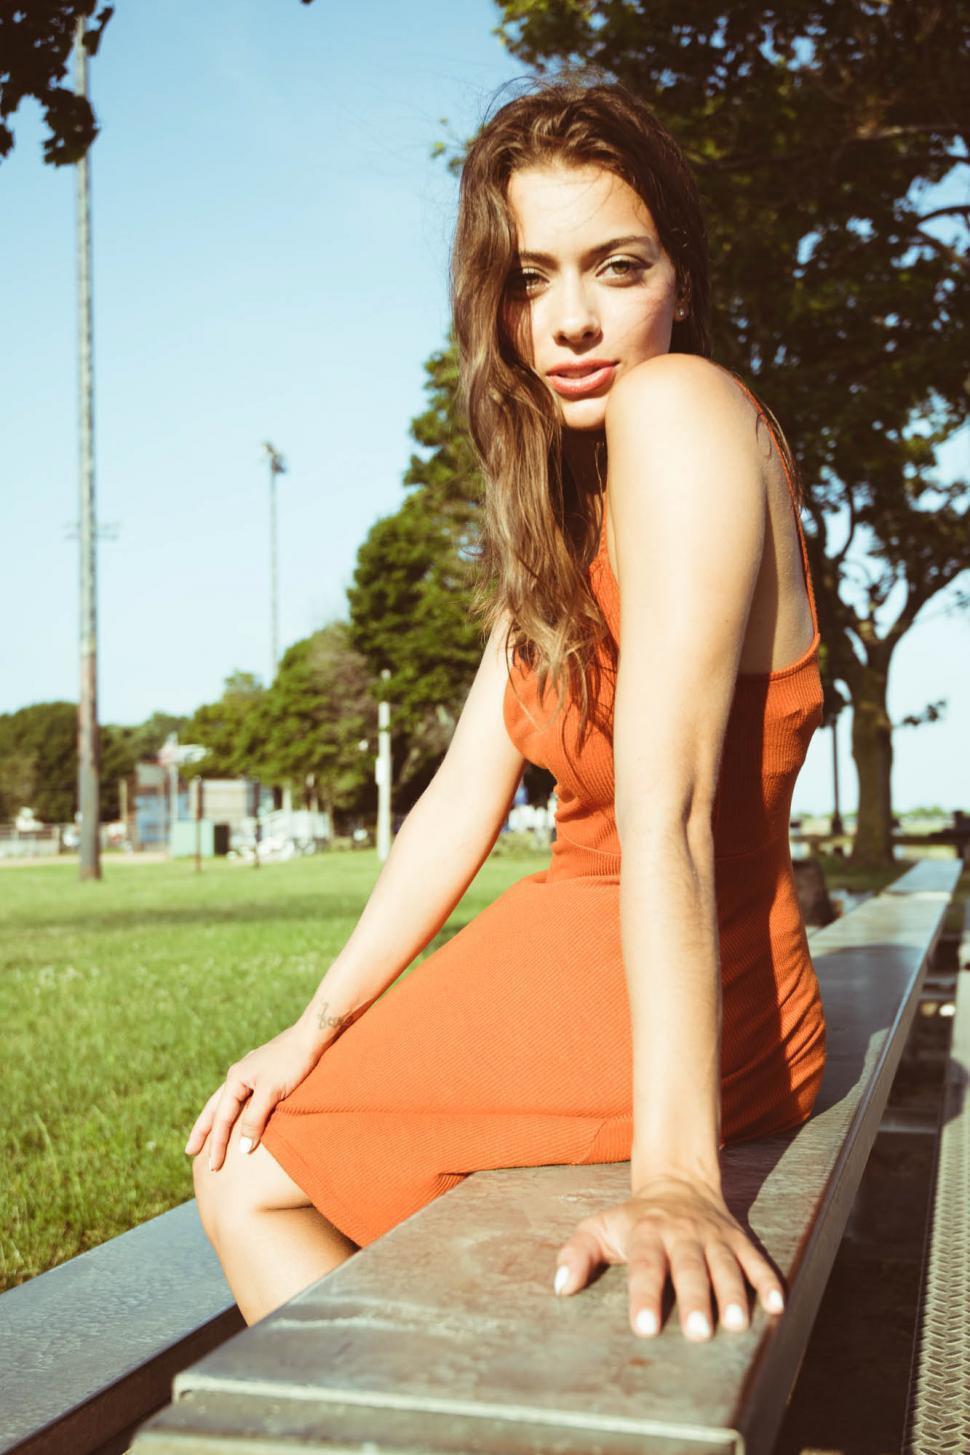 Free Image of Female fashion model posing in park - eye contact 